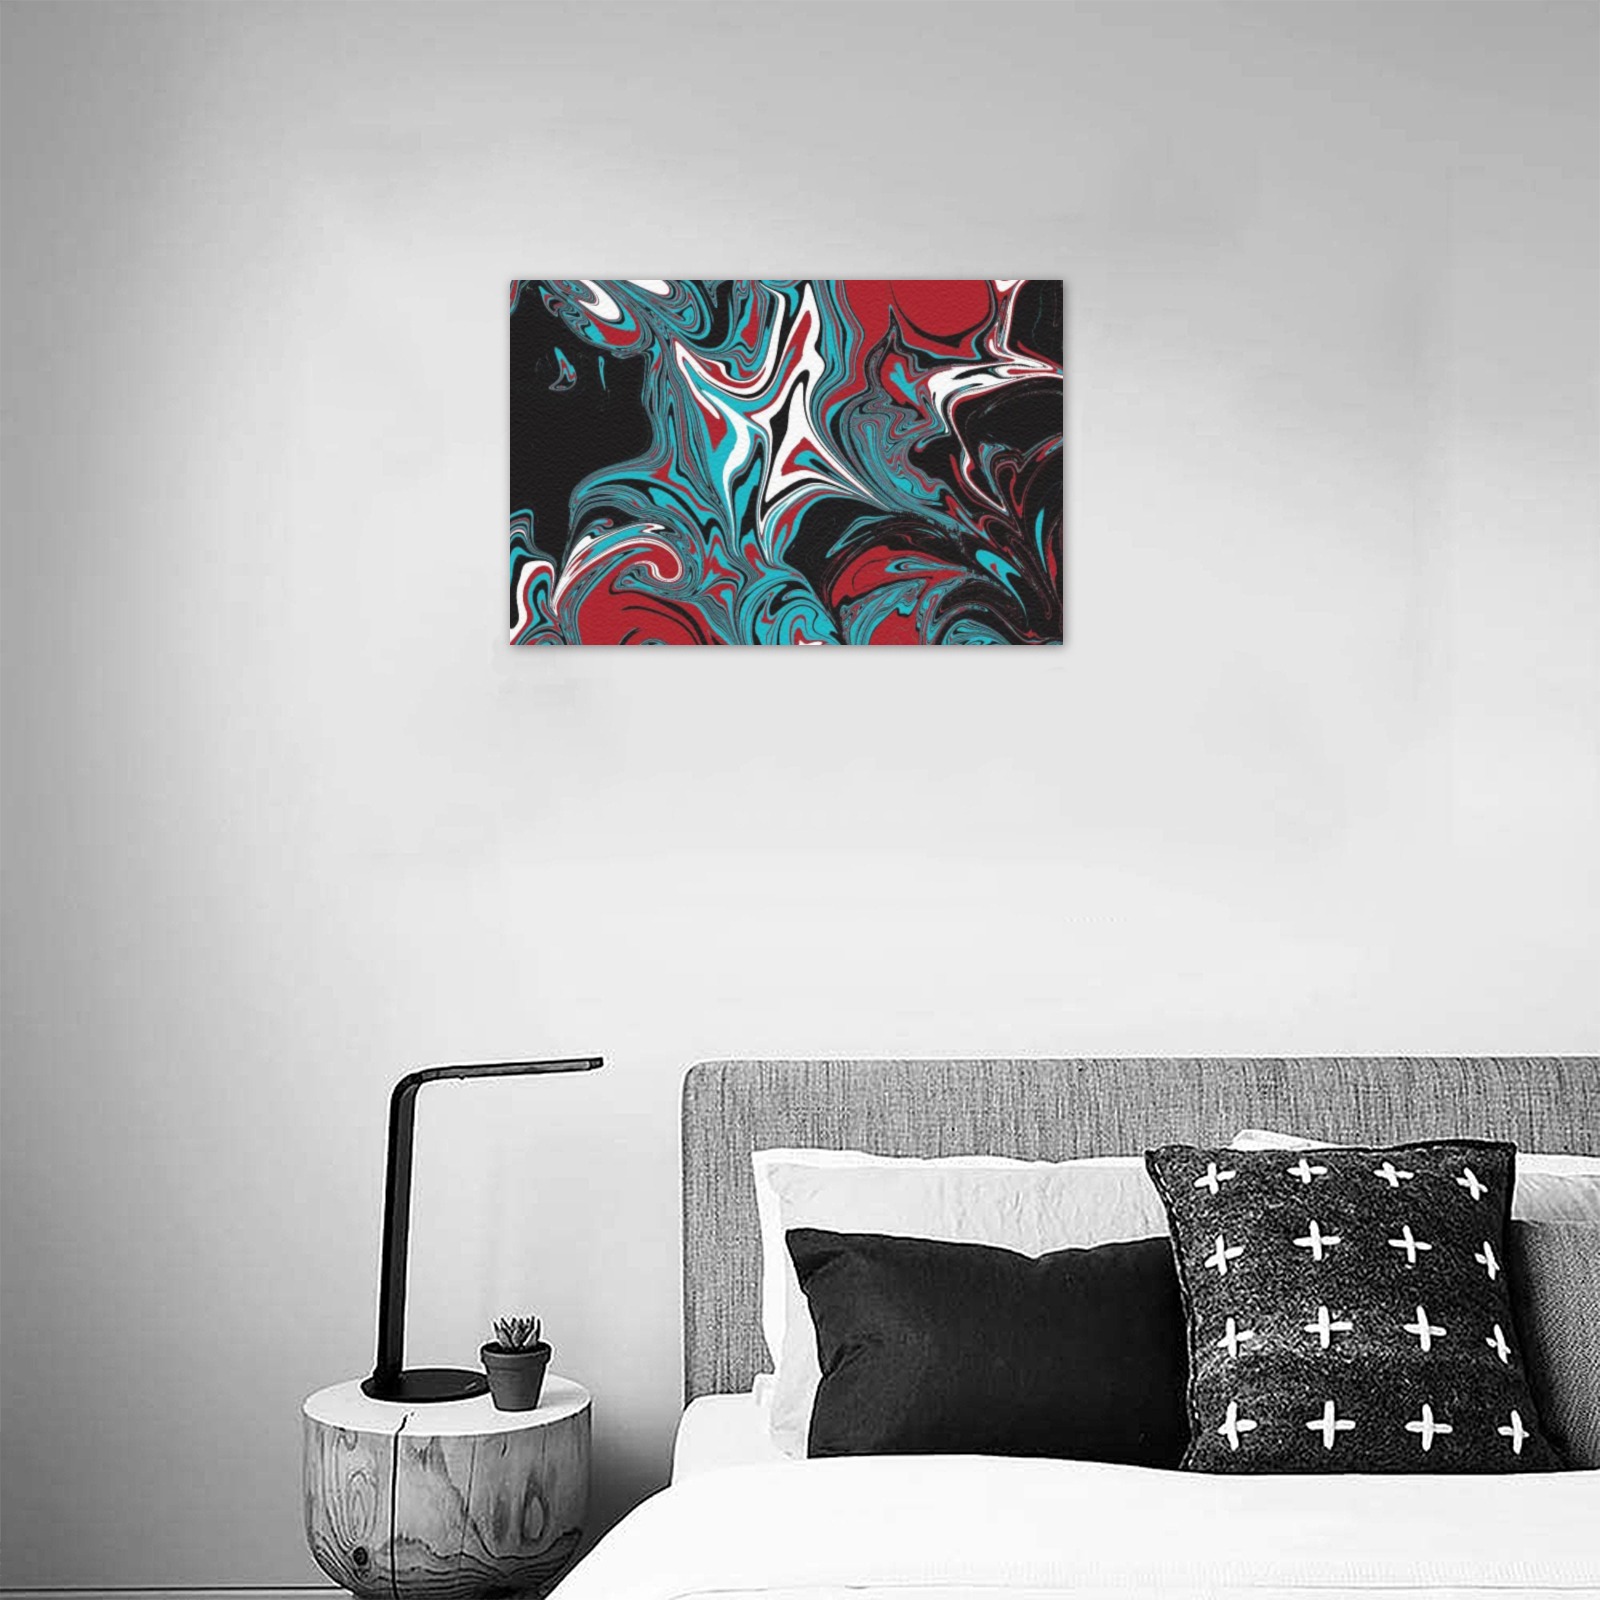 Dark Wave of Colors Upgraded Canvas Print 18"x12"